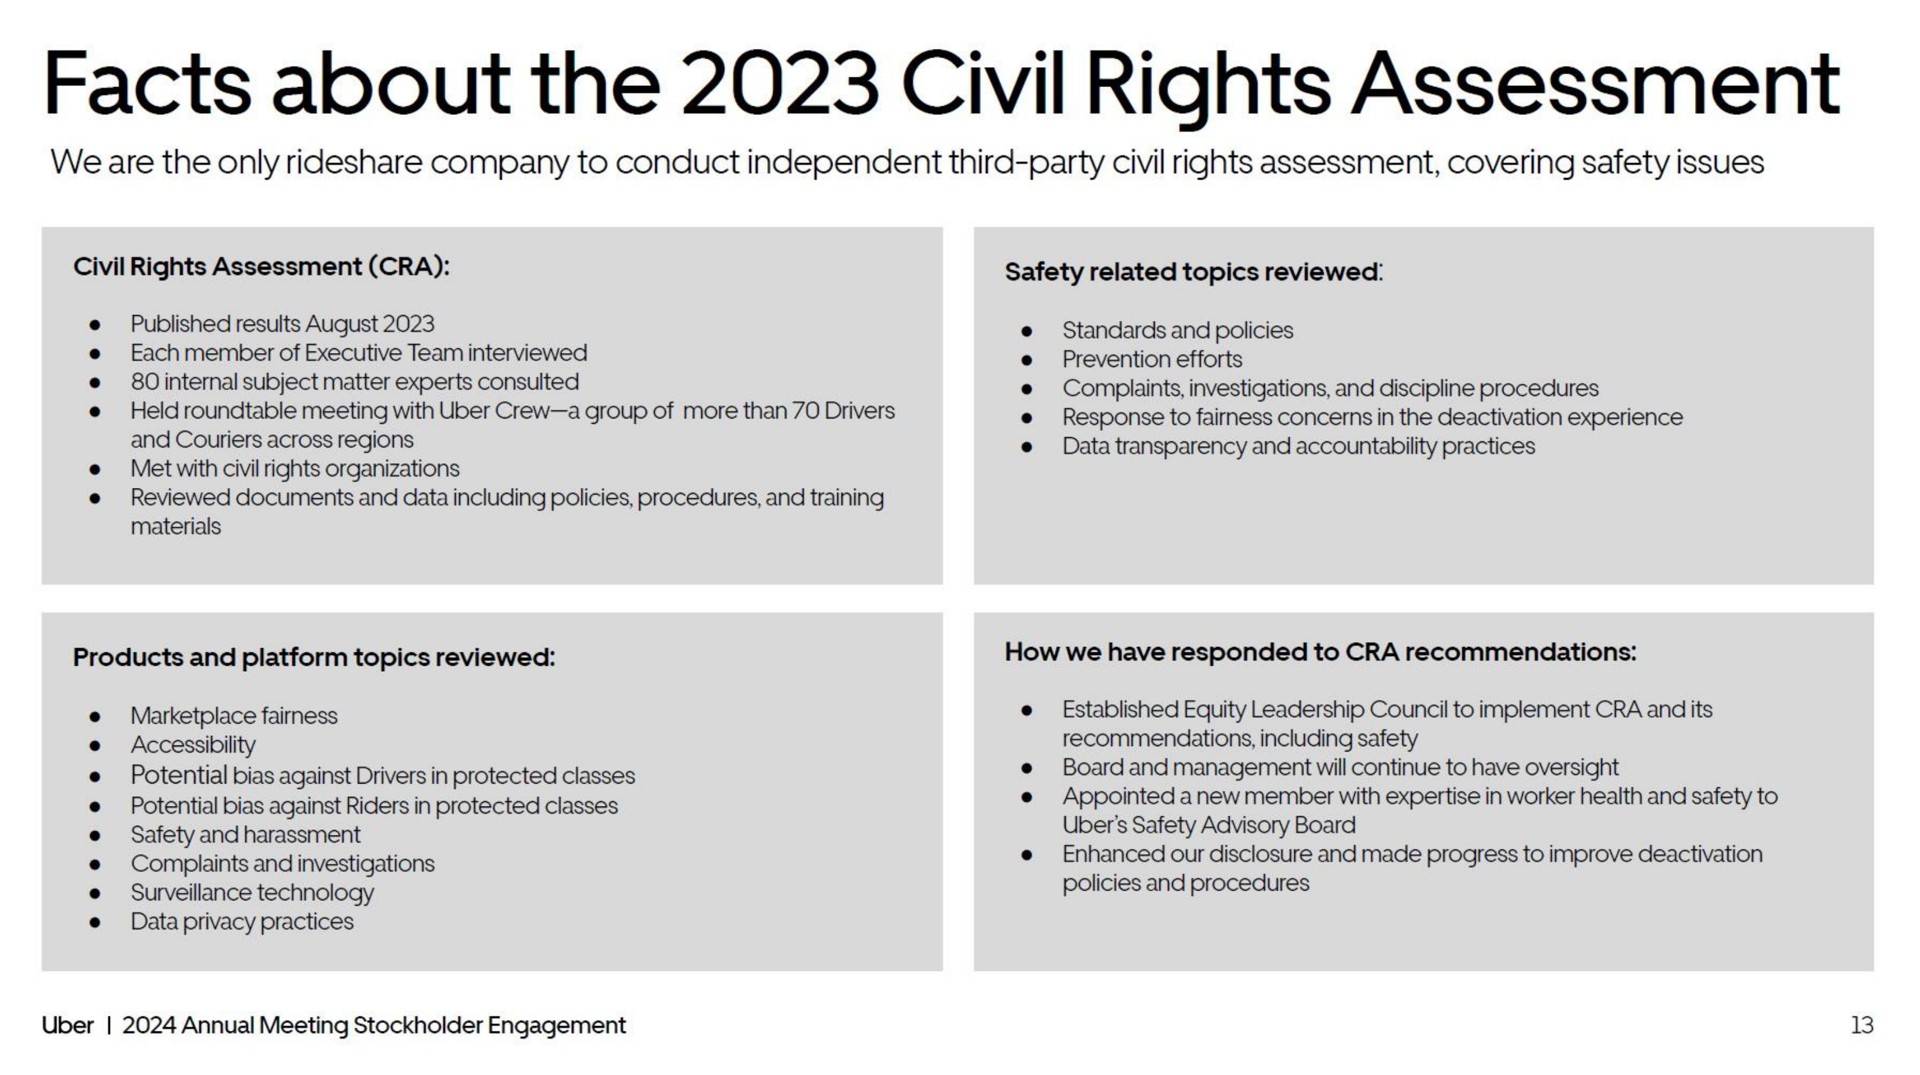 facts about the civil rights assessment | Uber